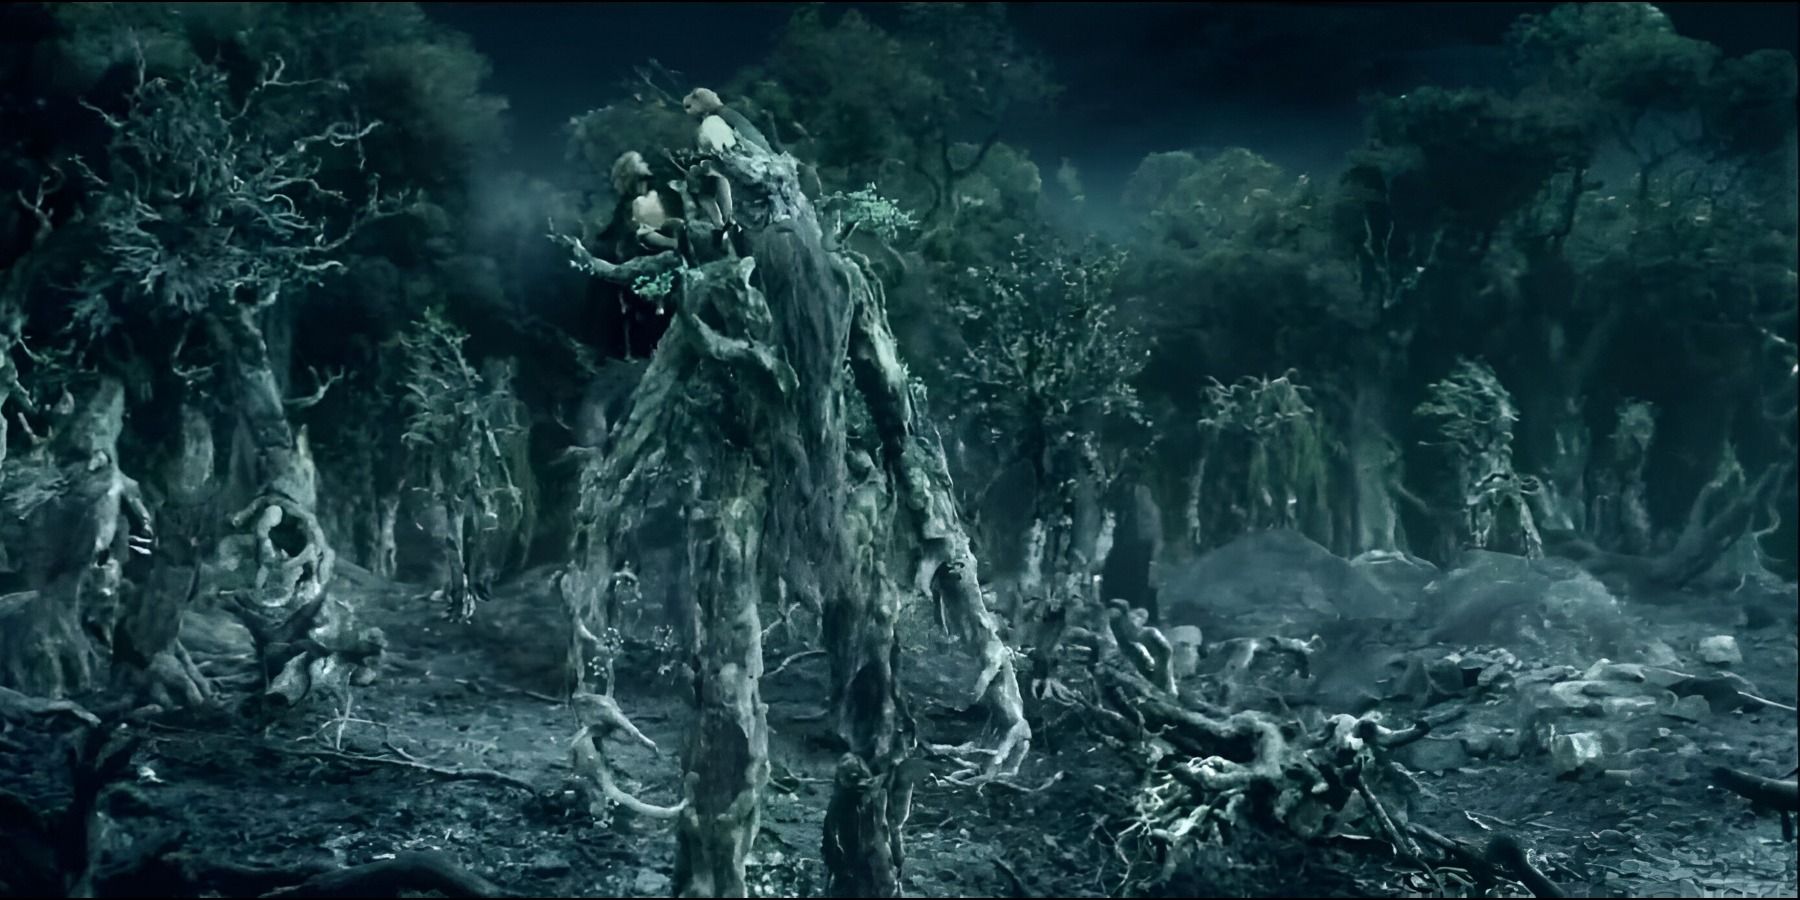 Treebeard and the Ents in The Lord of the Rings The Two Towers